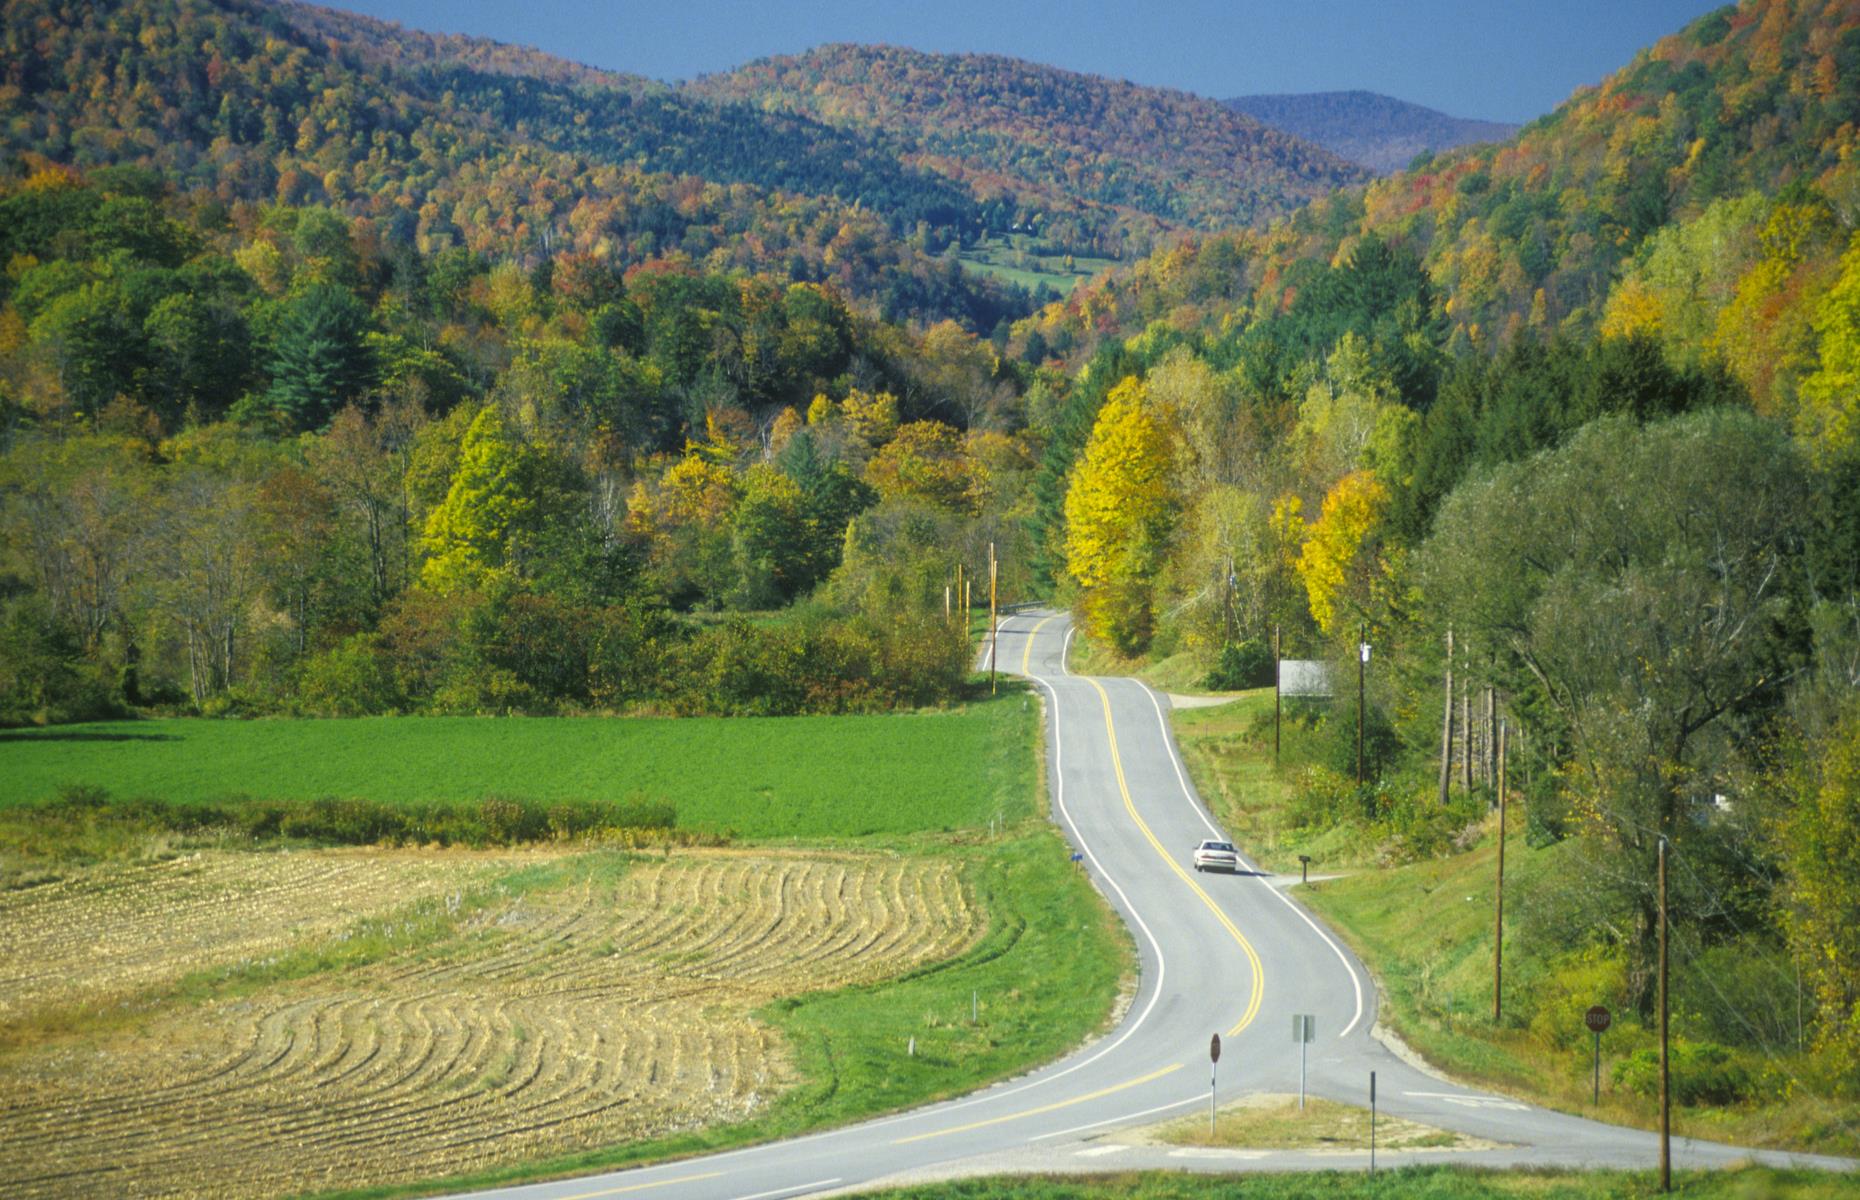 <p>Following Vermont’s Scenic Route 100 Byway (pictured), this New England road trip winds from the northern town of Stowe to Weston in Windsor County. While each town has charms aplenty, the road itself steals the show. Even more impressive in the fall, it clings to the eastern edge of the Green Mountains. Without any pit stops, the 100-mile (161km) drive takes under two hours 30 minutes. <a href="https://www.loveexploring.com/galleries/97470/most-beautiful-scenic-byway-in-every-state?page=1">Discover the most beautiful scenic byway in every state</a>.</p>